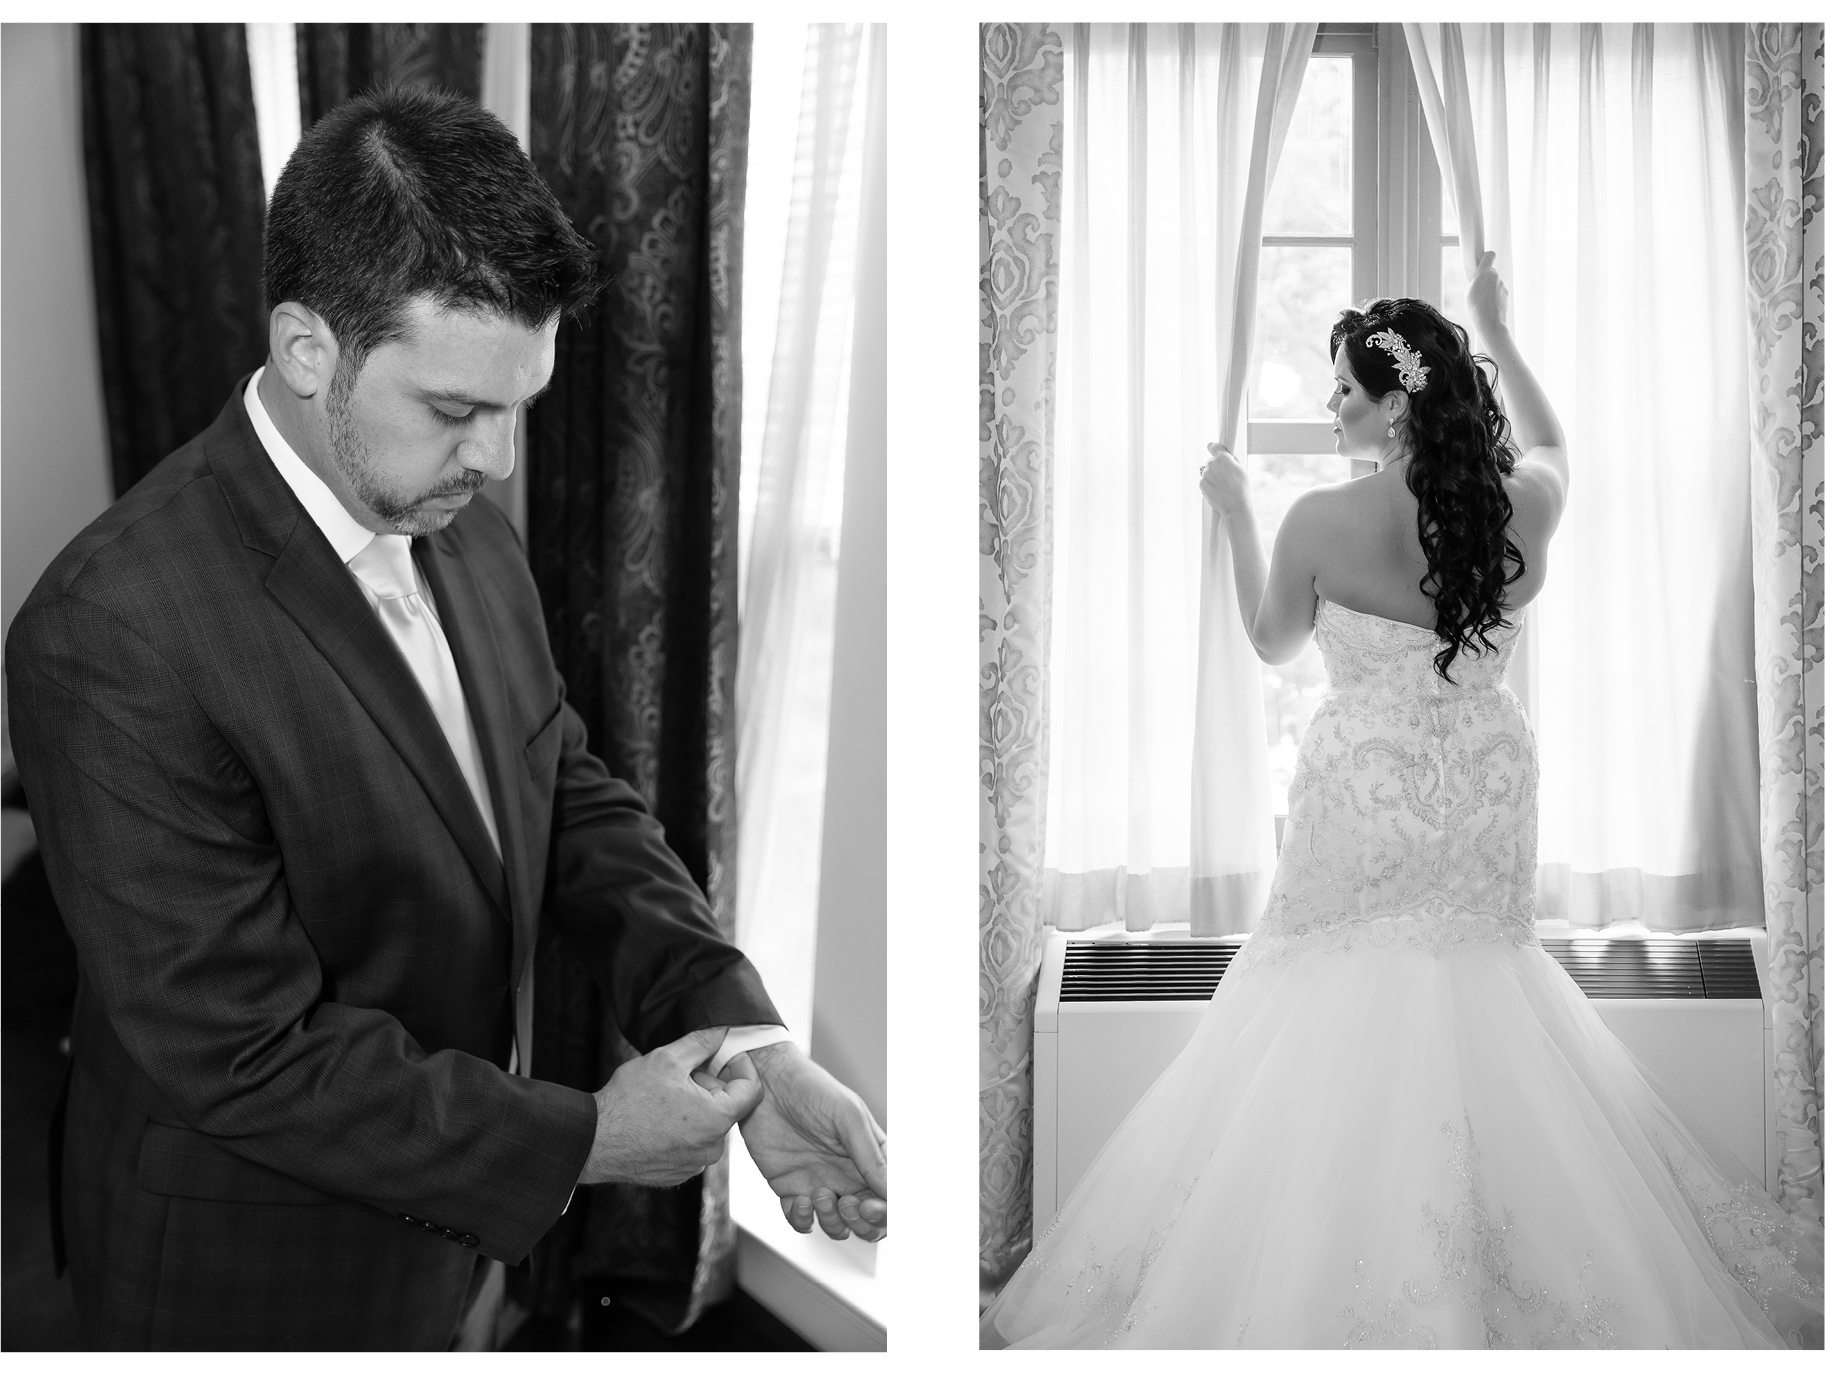 Jon and Victoria’s Wedding :: Blue Bell Country Club, PA – Michelle Lala Clark ...